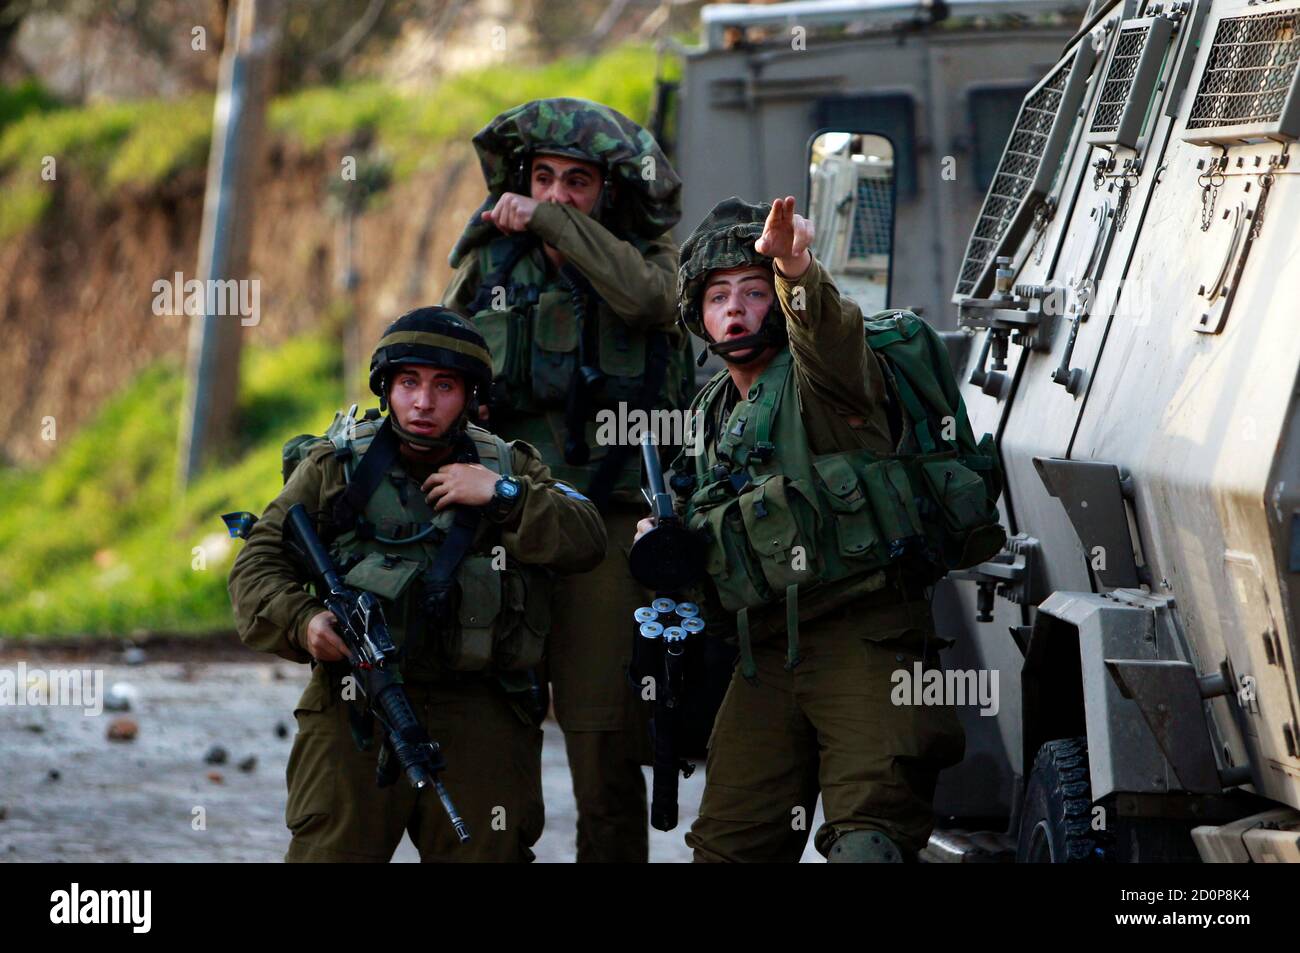 An Israeli soldier points during clashes with stone throwing Palestinians protesting against a nearby Jewish settlement in the West Bank village of Burin, south of Nablus February 2, 2013. Israeli soldiers used tear gas and stun grenades on Saturday to disperse about 150 Palestinians trying to block expansion of Israeli settlements in the occupied West Bank. Both sides sustained light injuries as the soldiers removed about a dozen tents and small huts from land adjacent to the Palestinian northern West Bank village of Burin, Palestinian witnesses and the Army said. REUTERS/Ammar Awad (WEST BAN Stock Photo